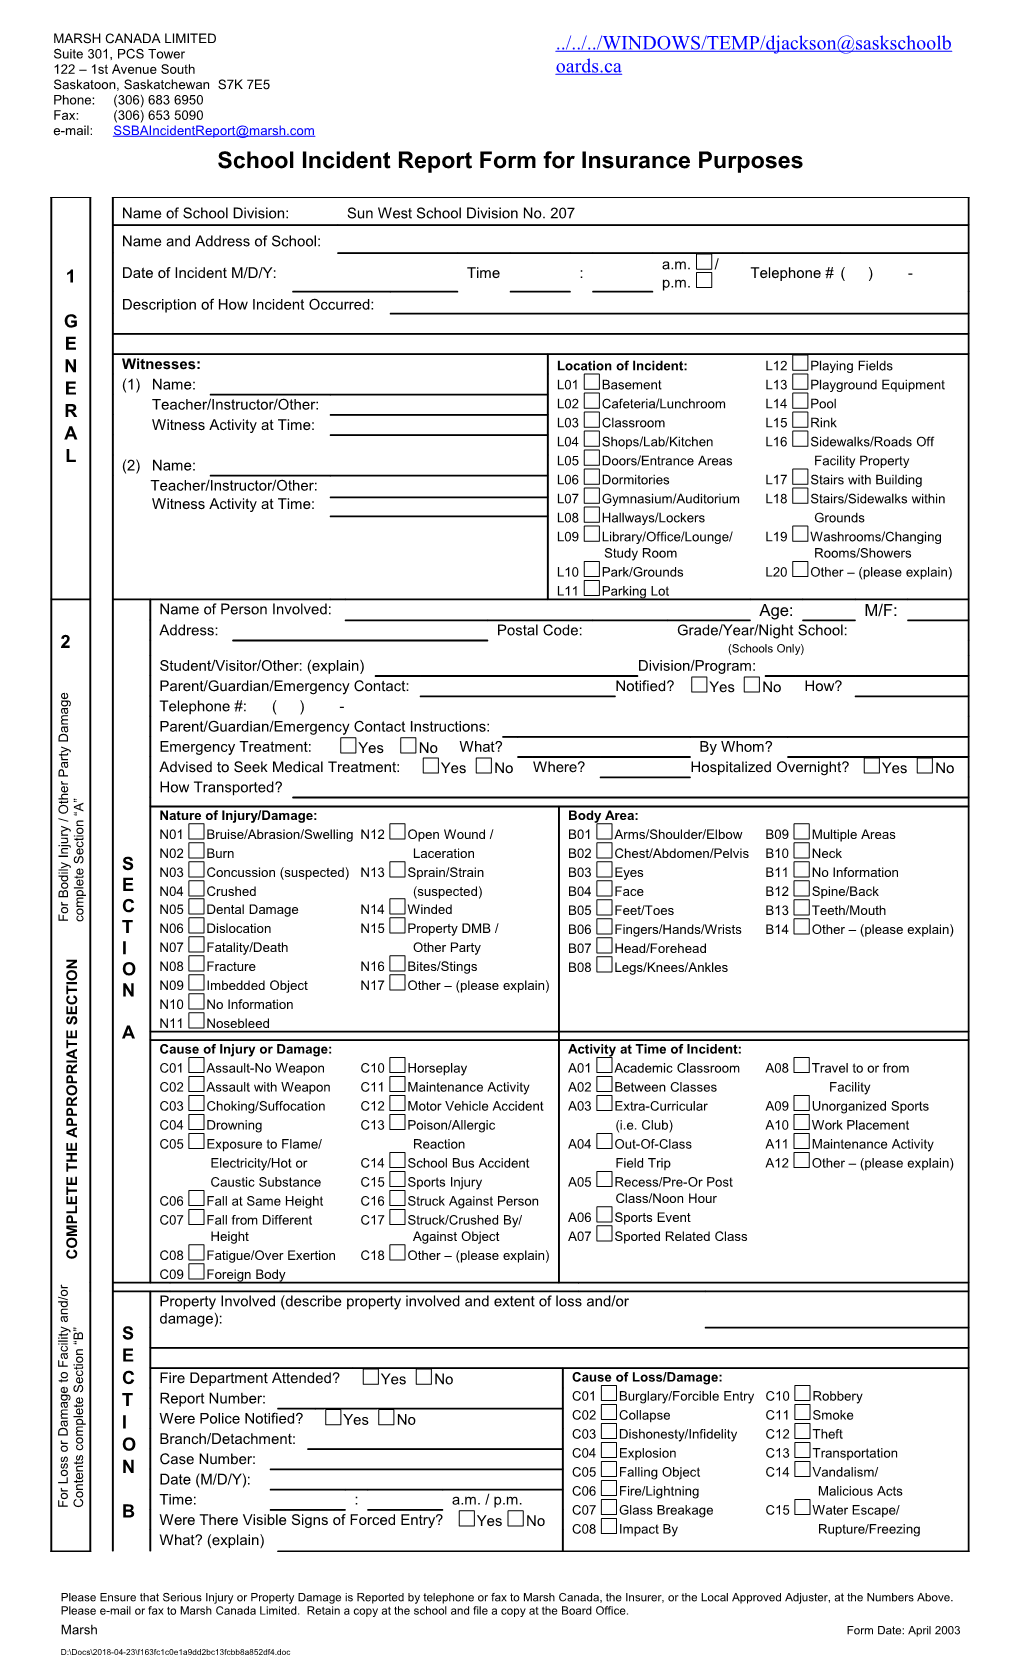 School Incident Report Form for Insurance Purposes